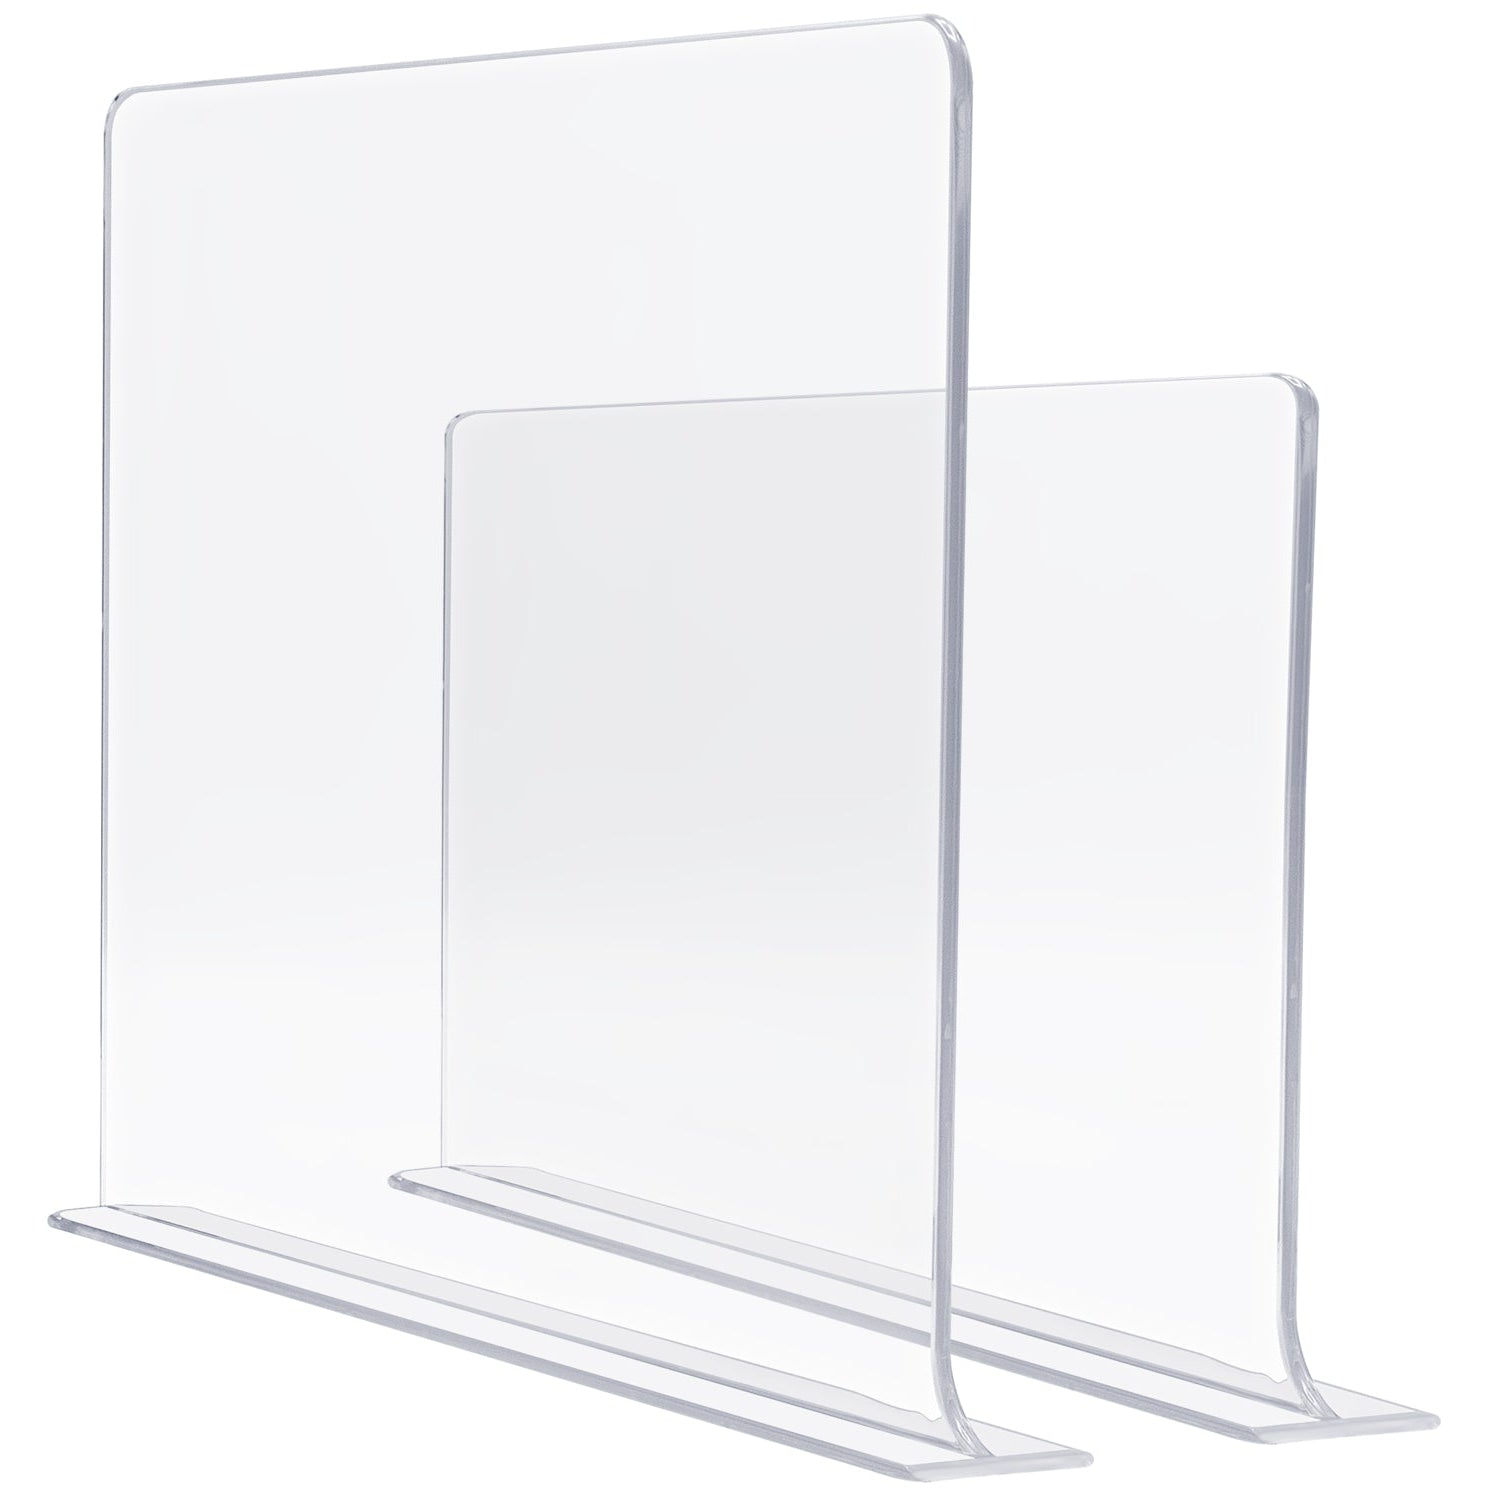 Sorbus Acrylic Shelf Divider With Adhesive Tape for Closet